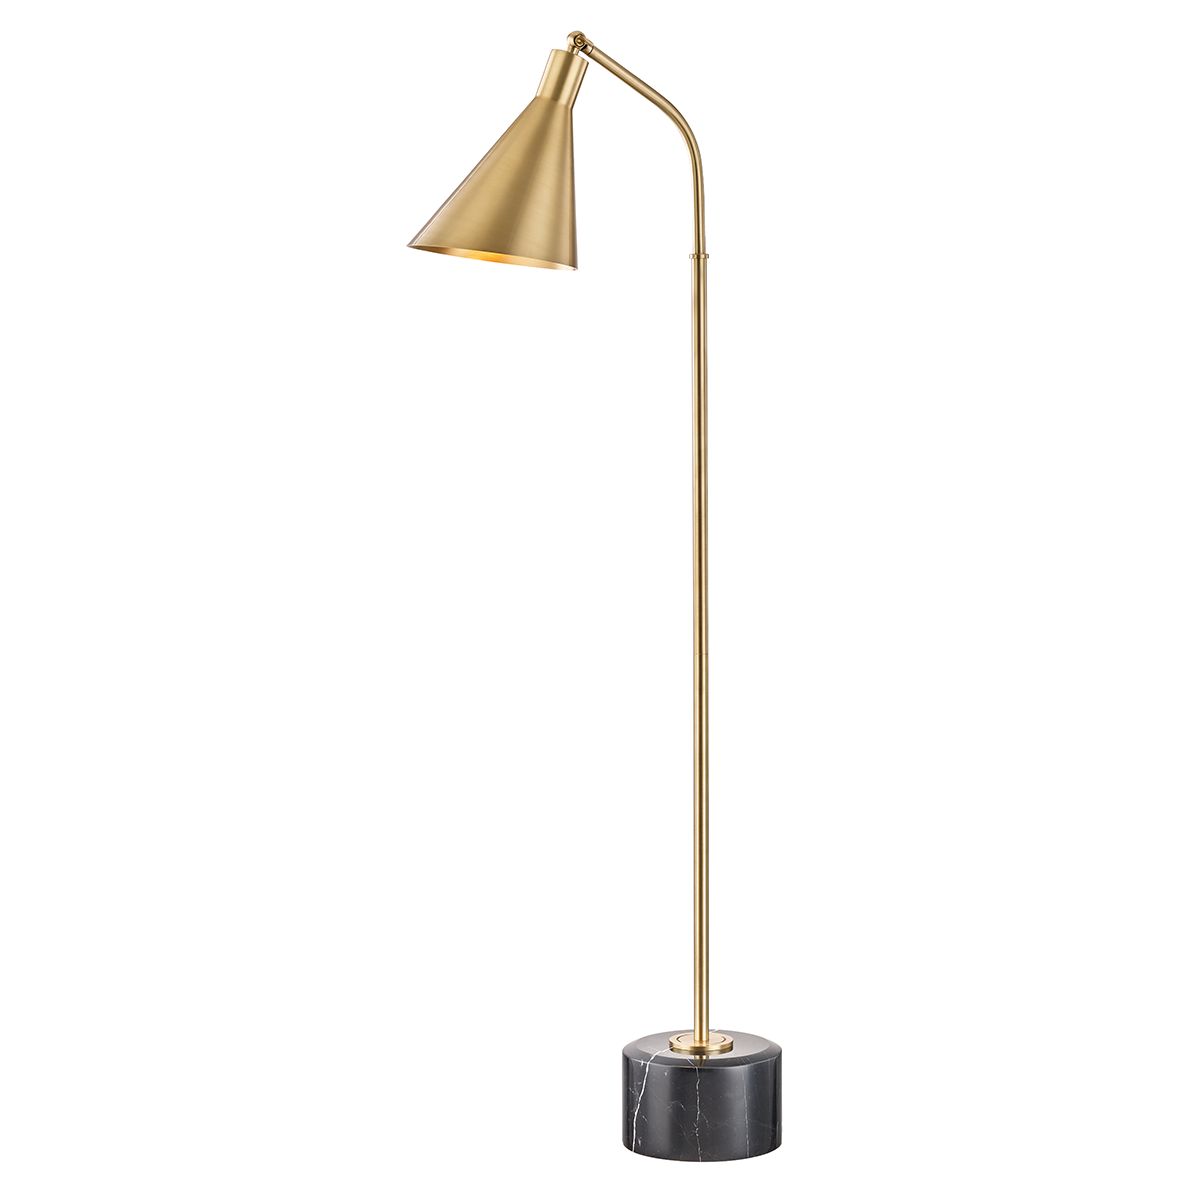 Stanton Floor Lamp Black Marble Base and Aged Brass Finish